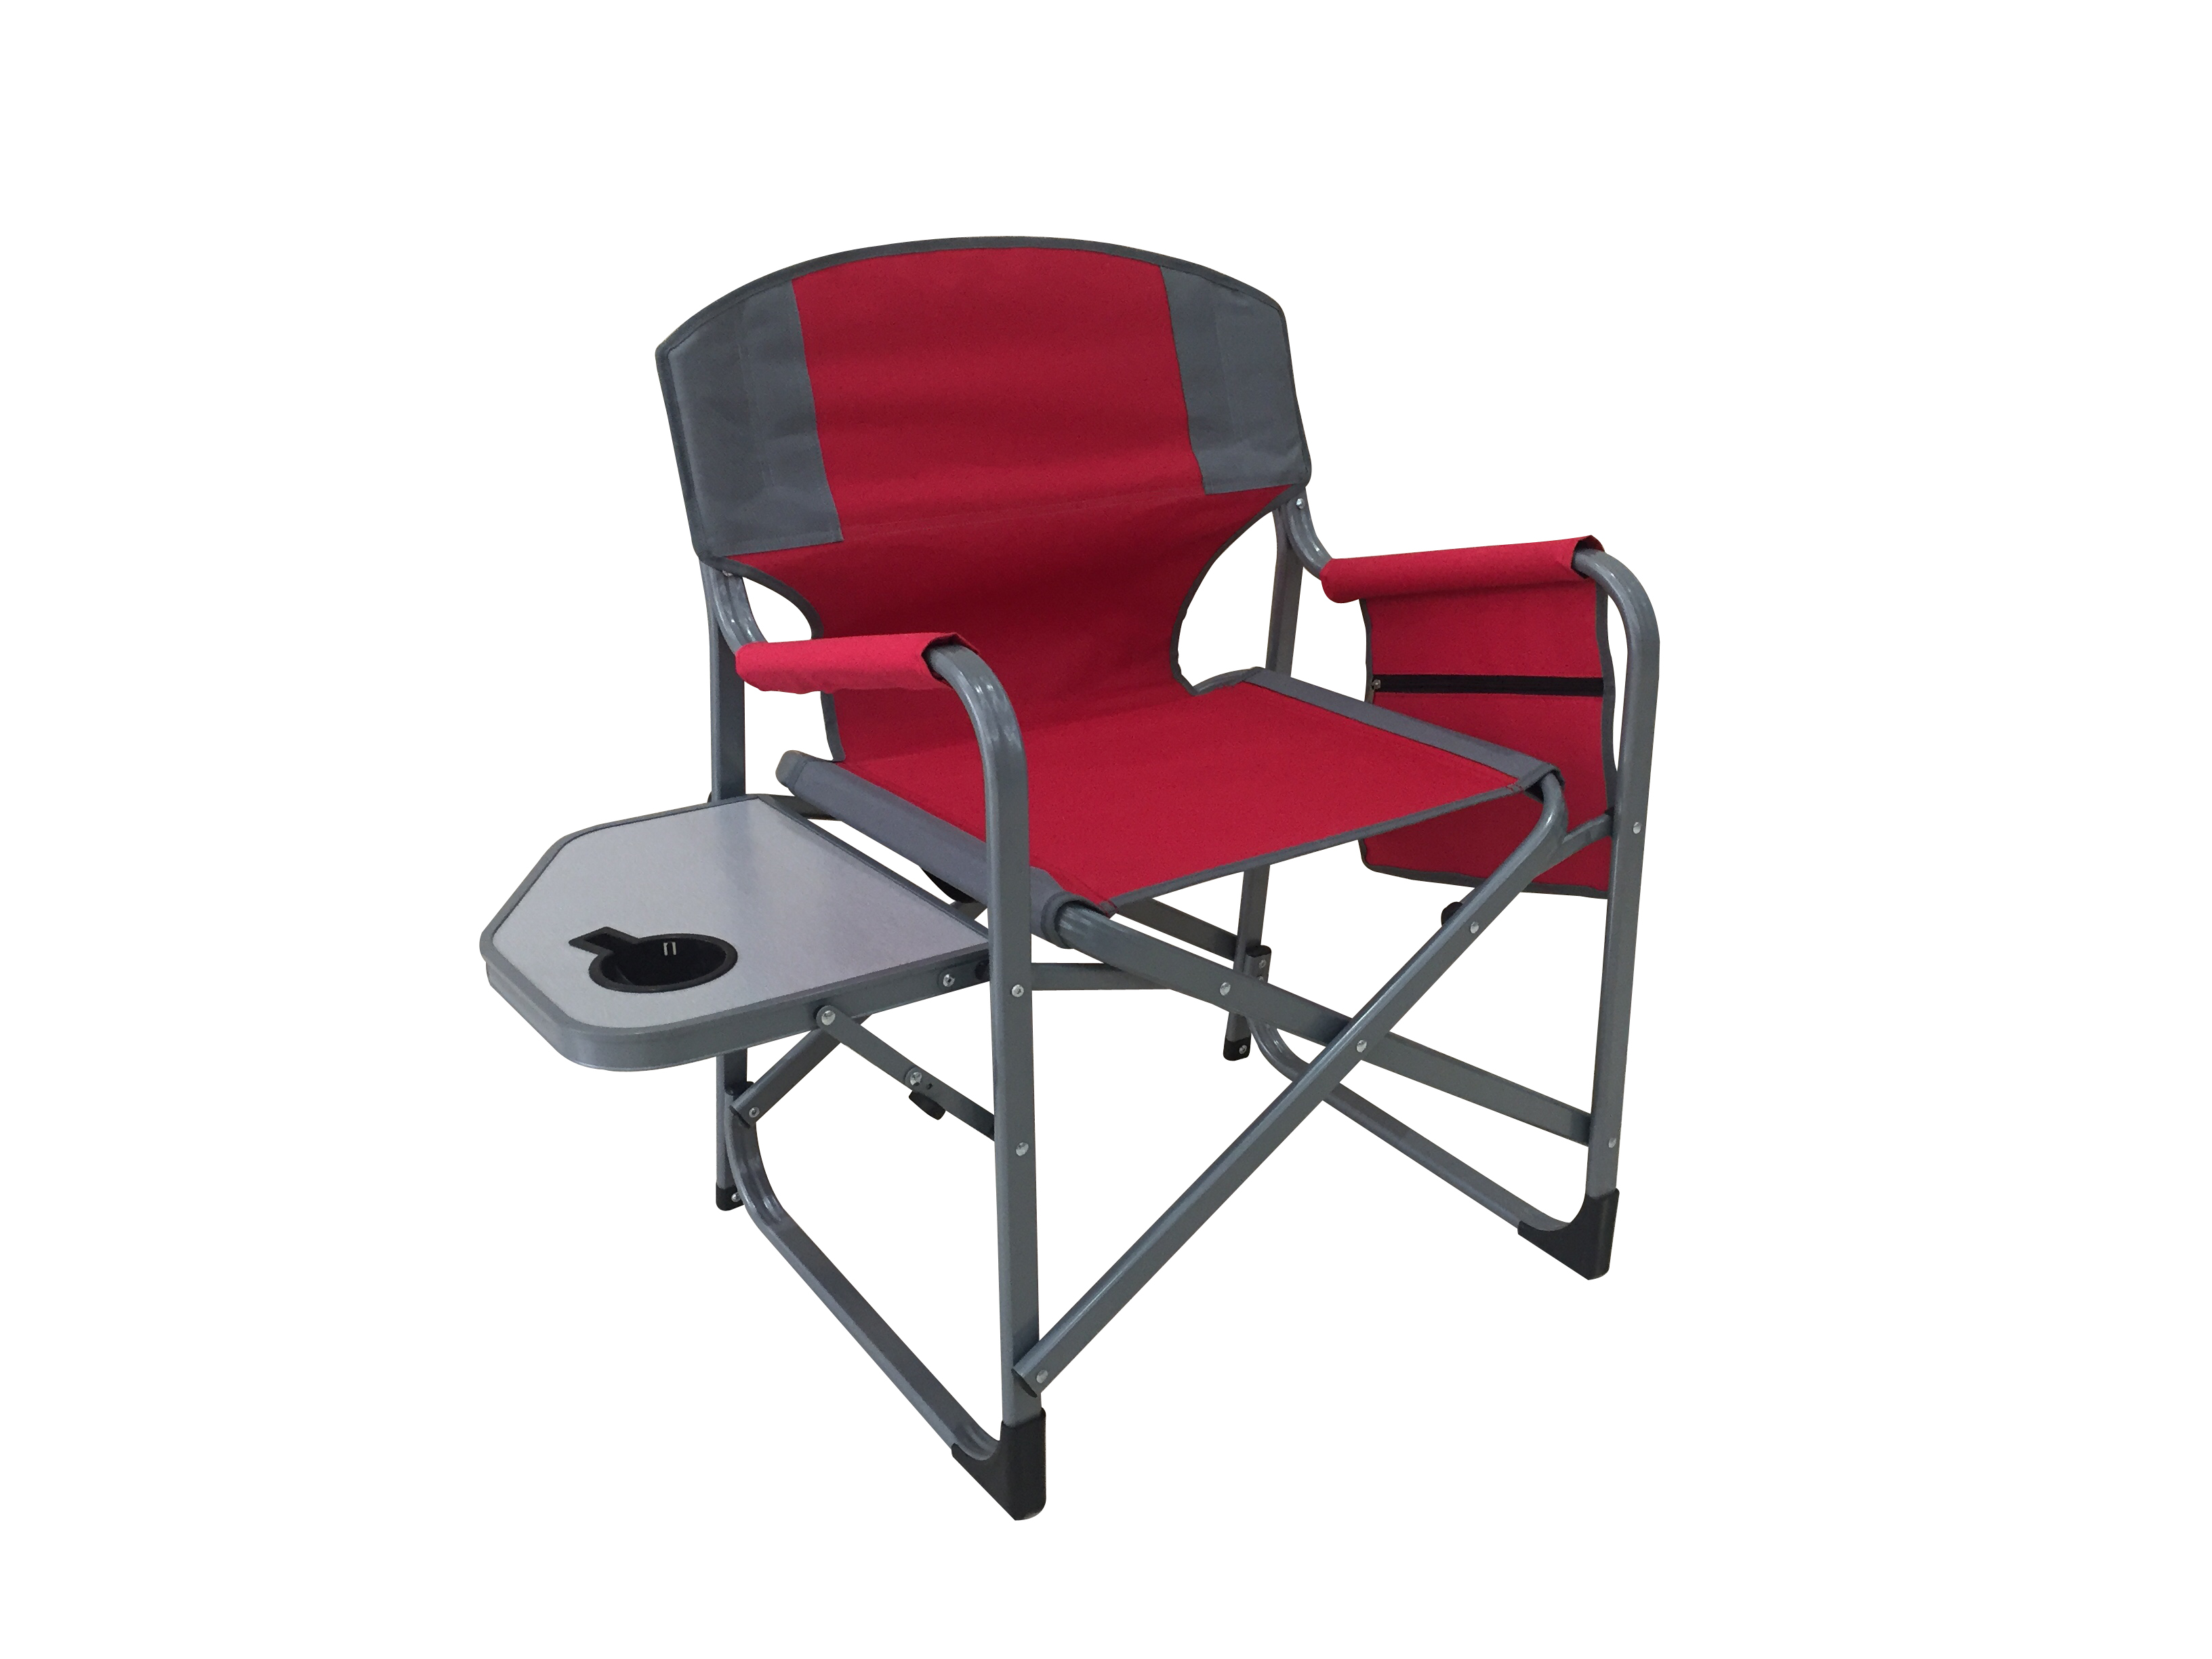 CAMP & GO EVEREST DIRECTOR CHAIR RED/GREY